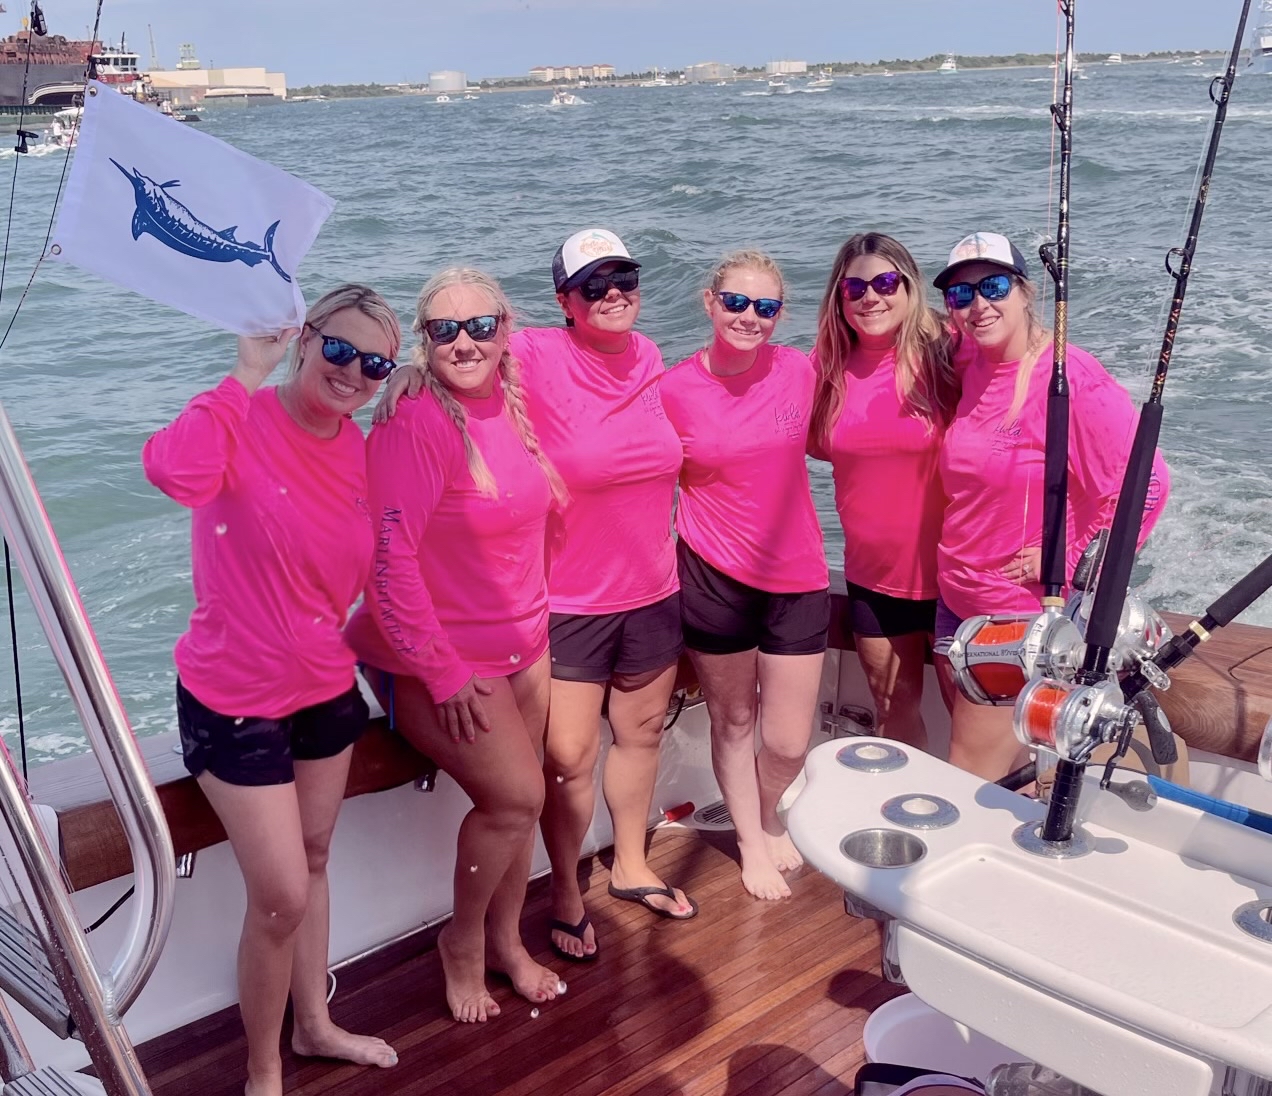 Diana posing with other women on boat at KWLA tournament